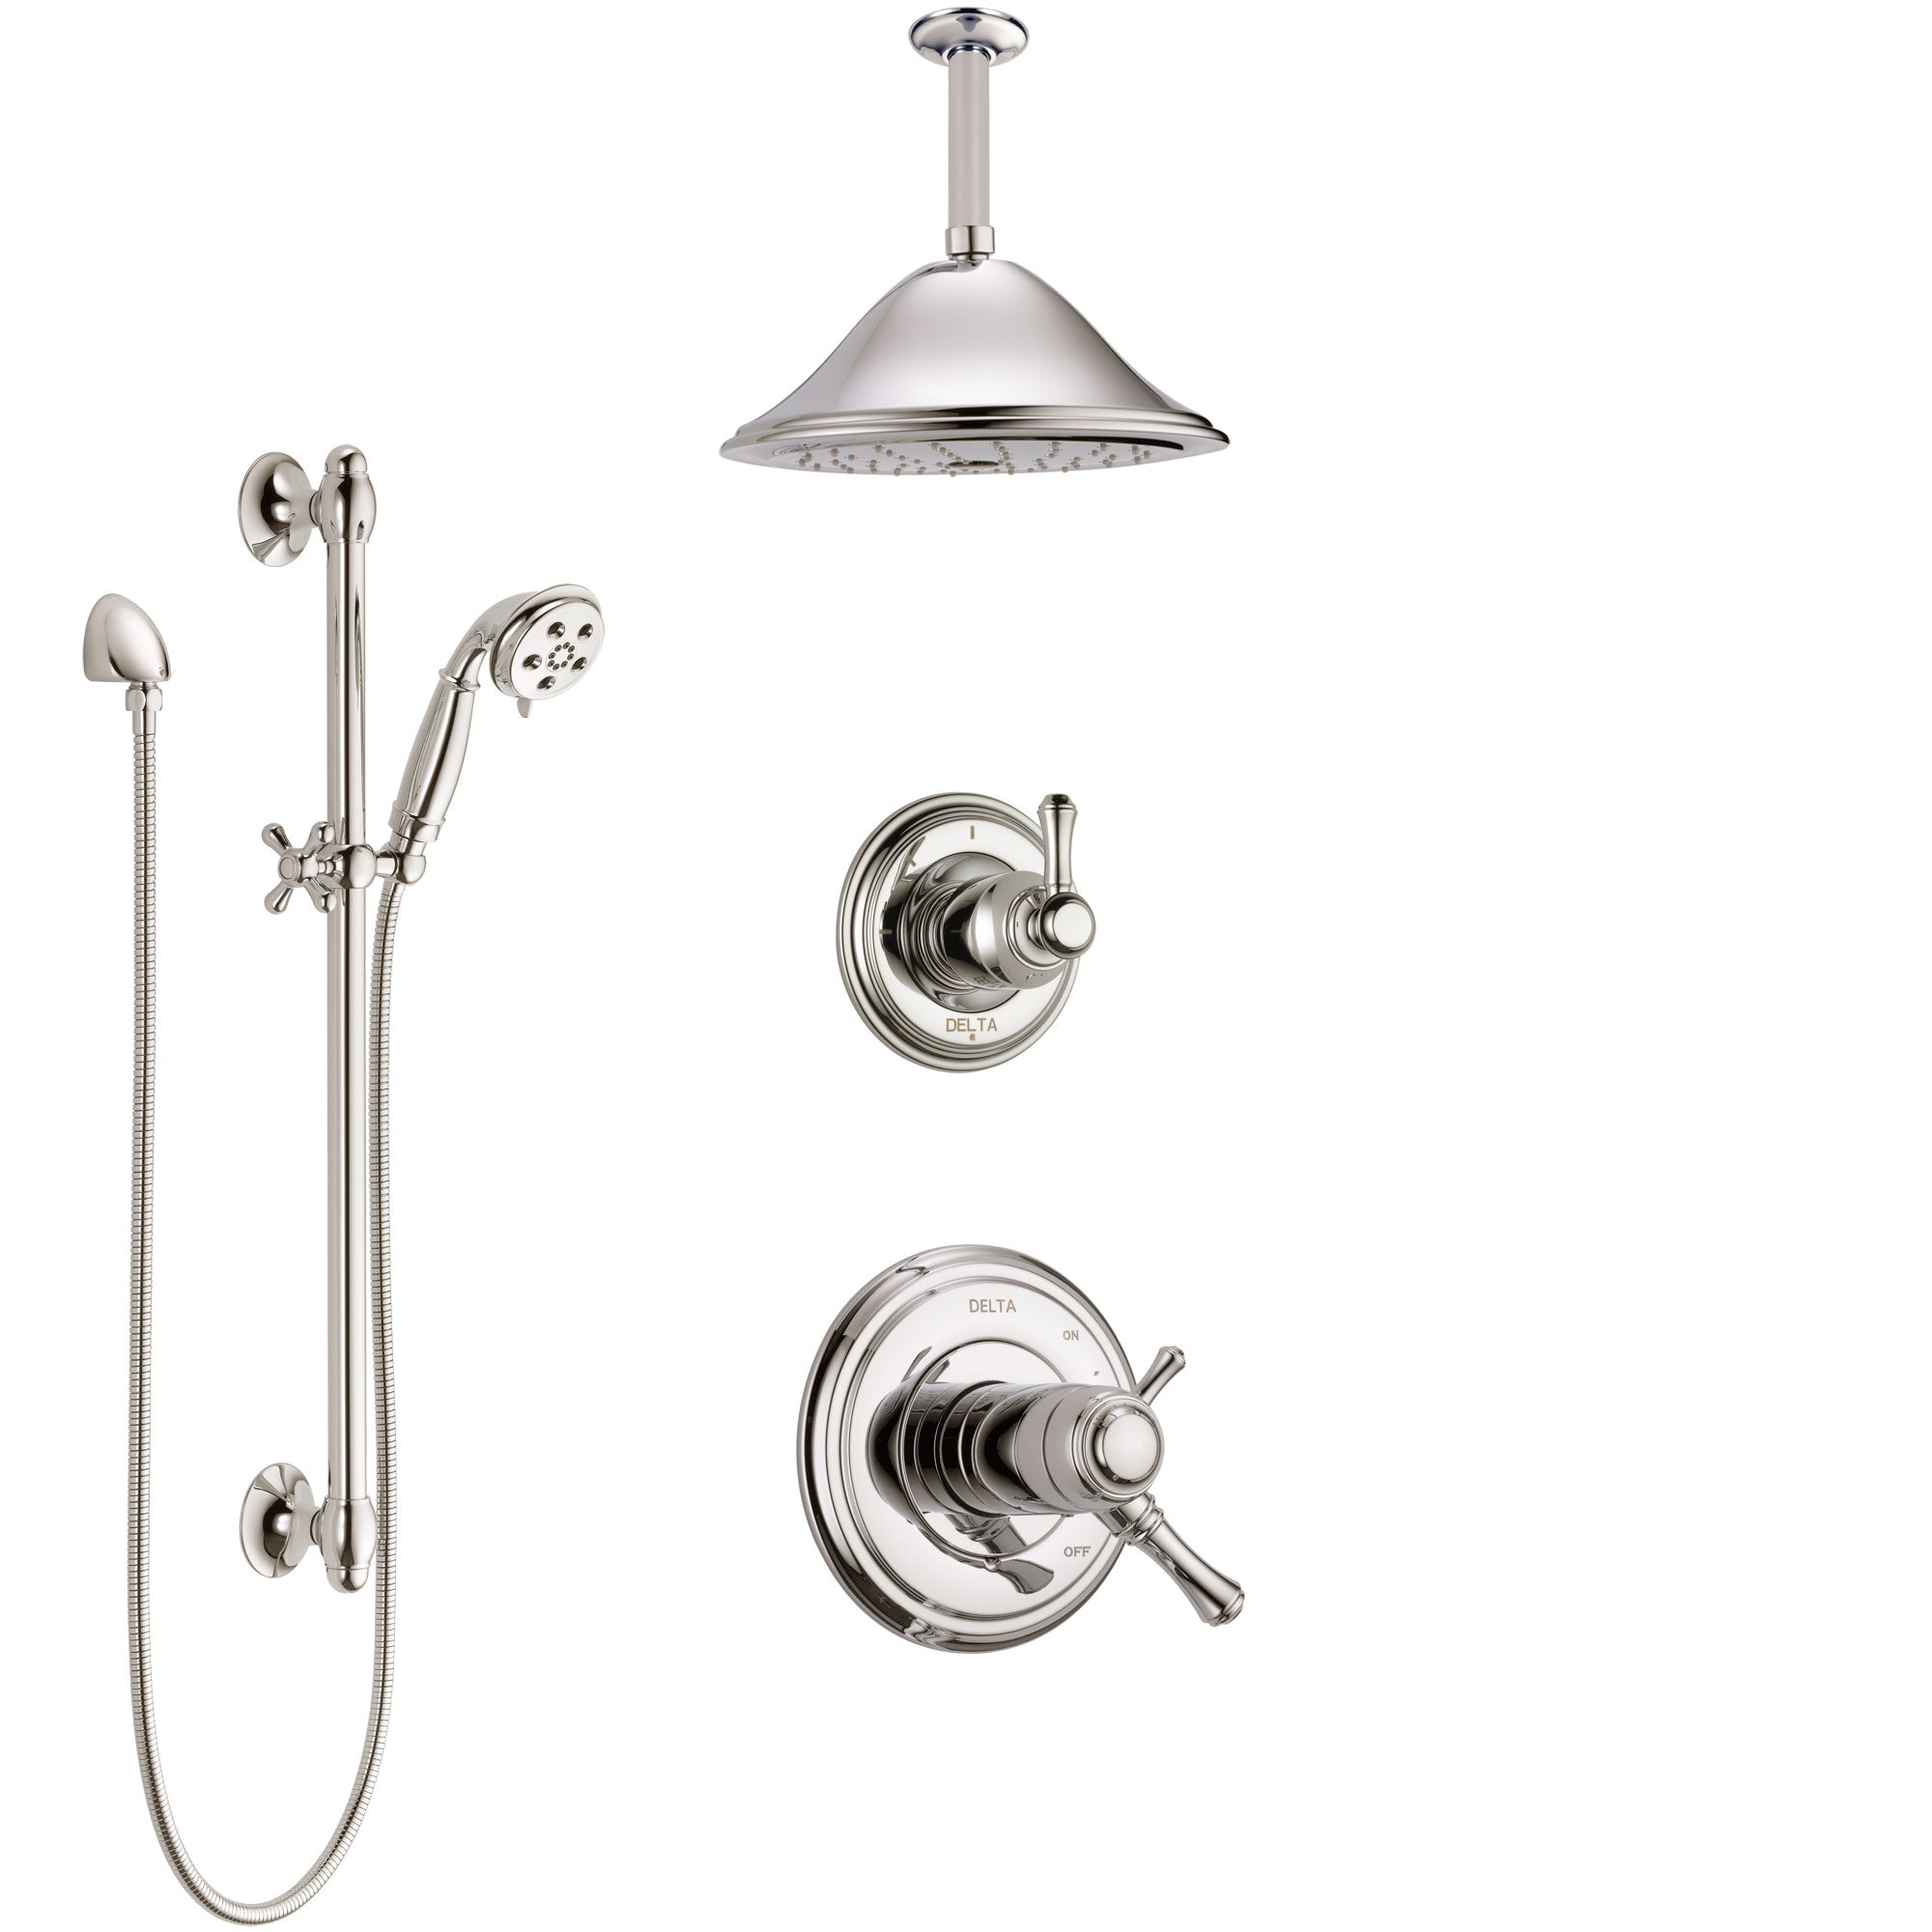 Delta Cassidy Polished Nickel Shower System with Dual Thermostatic Control Handle, Diverter, Ceiling Mount Showerhead, and Hand Shower SS17T972PN3